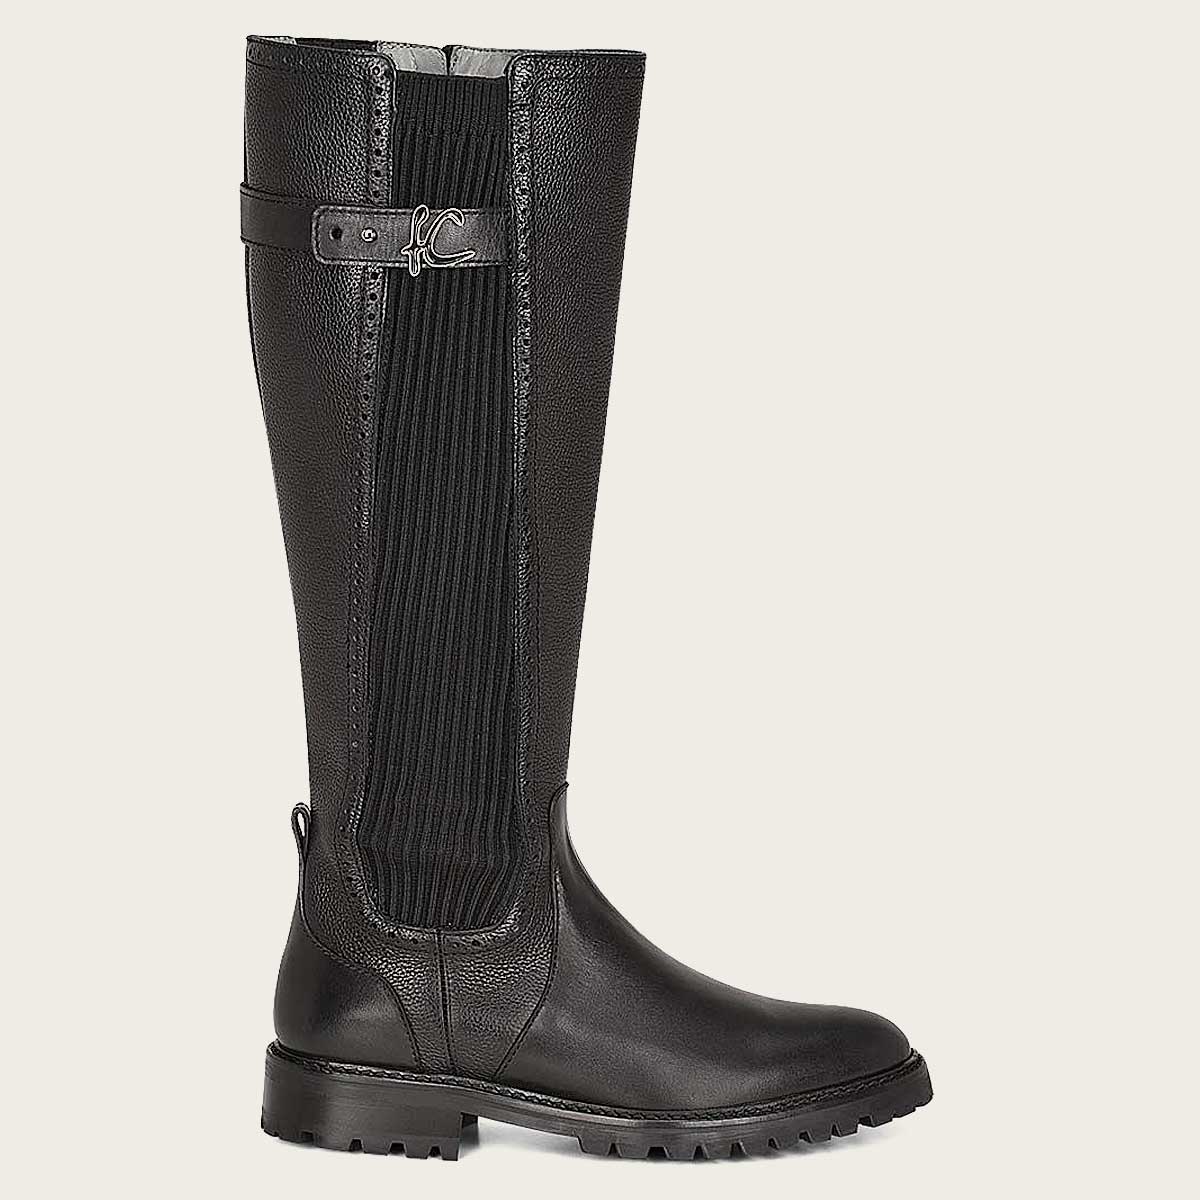 these high boots come with an internal closure and an elastic insert for more comfortable fit.